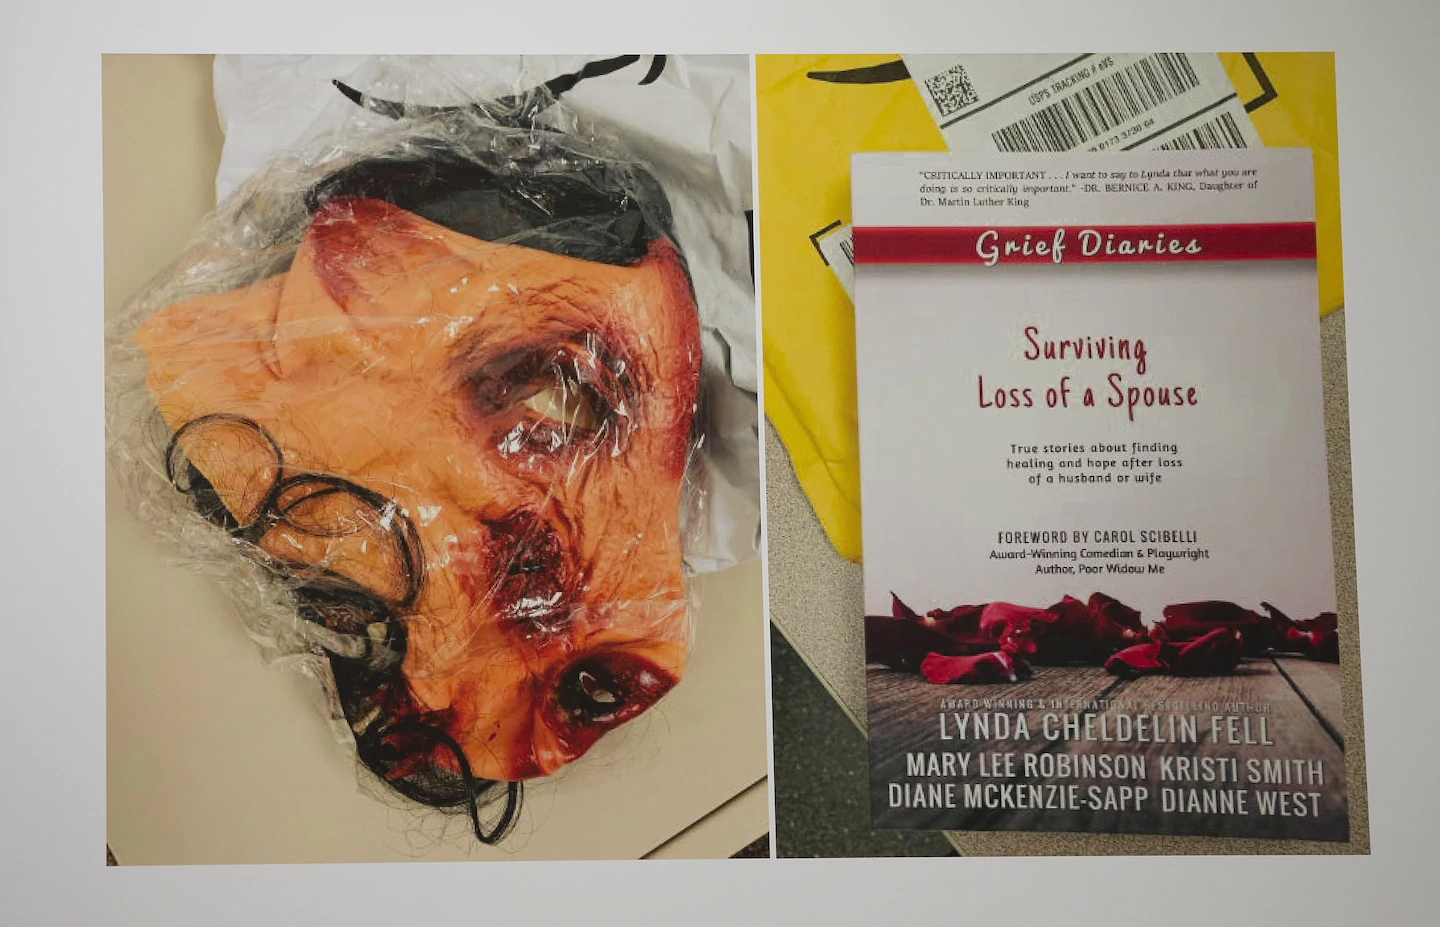 Former eBay executives charged with cyberstalking after allegedly sending bloody pig mask to bloggers